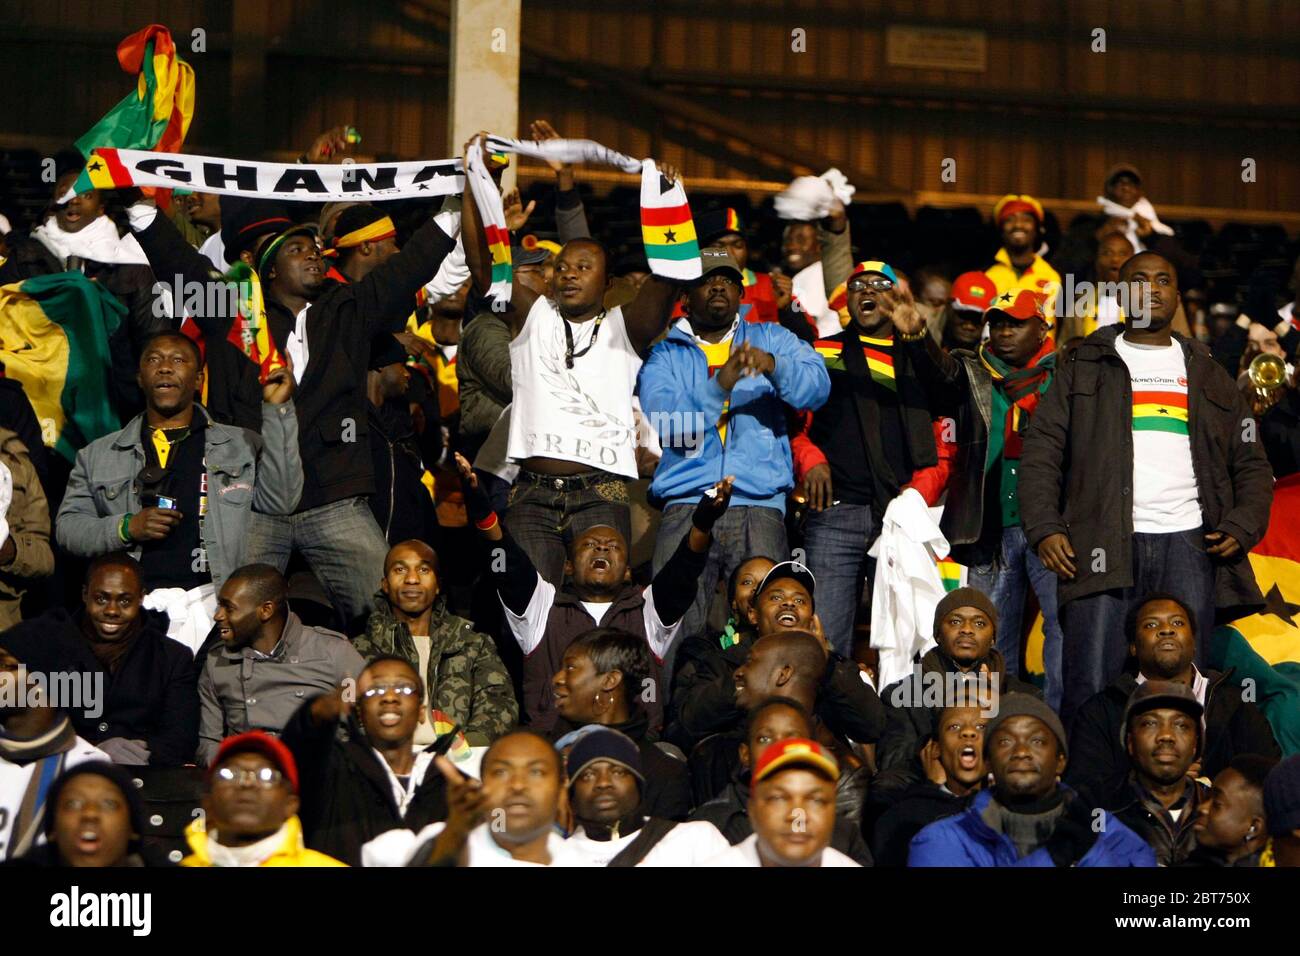 LONDON, UK. MARCH 26: Ghana fans  during International Friendly between Mexico City and Ghana at Craven Cottage, Fulham 26 March, 2008 Stock Photo